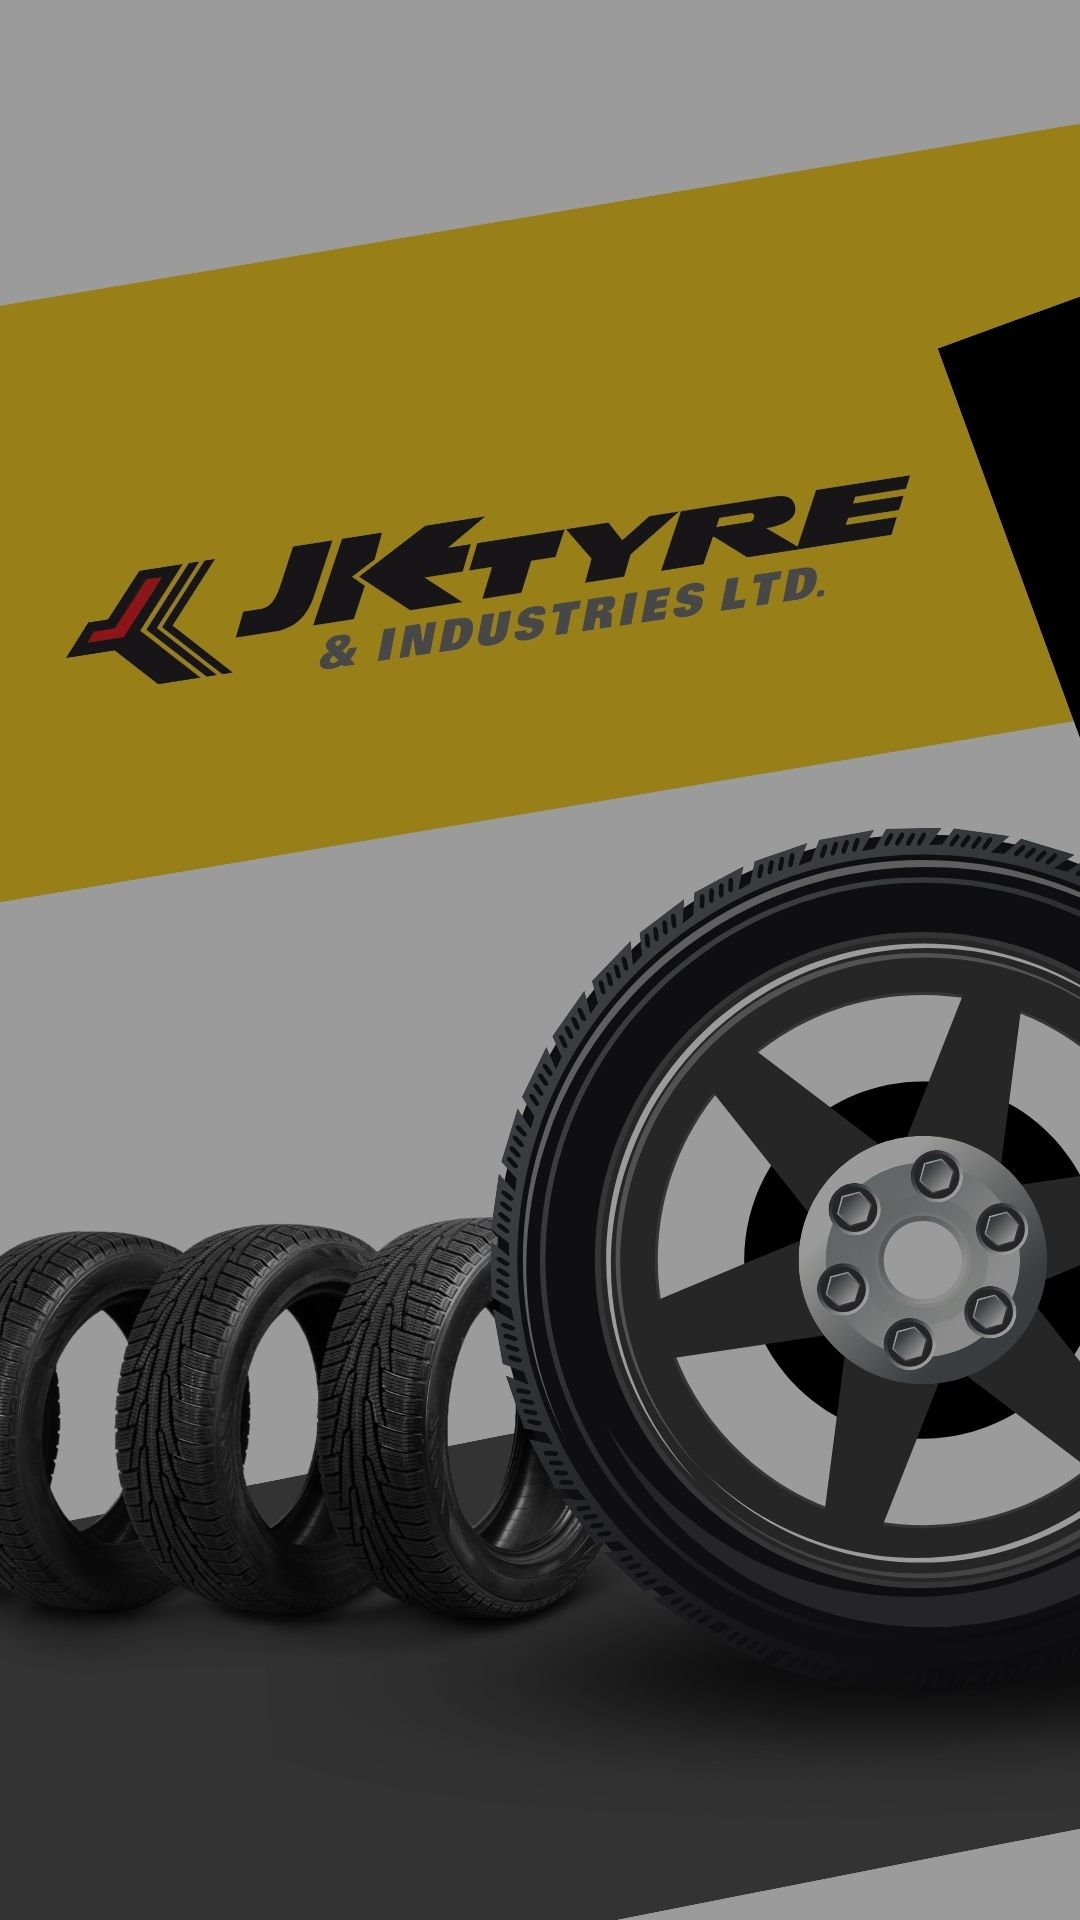 Elanzo Touring tyre for Suv cars - JK Tyre